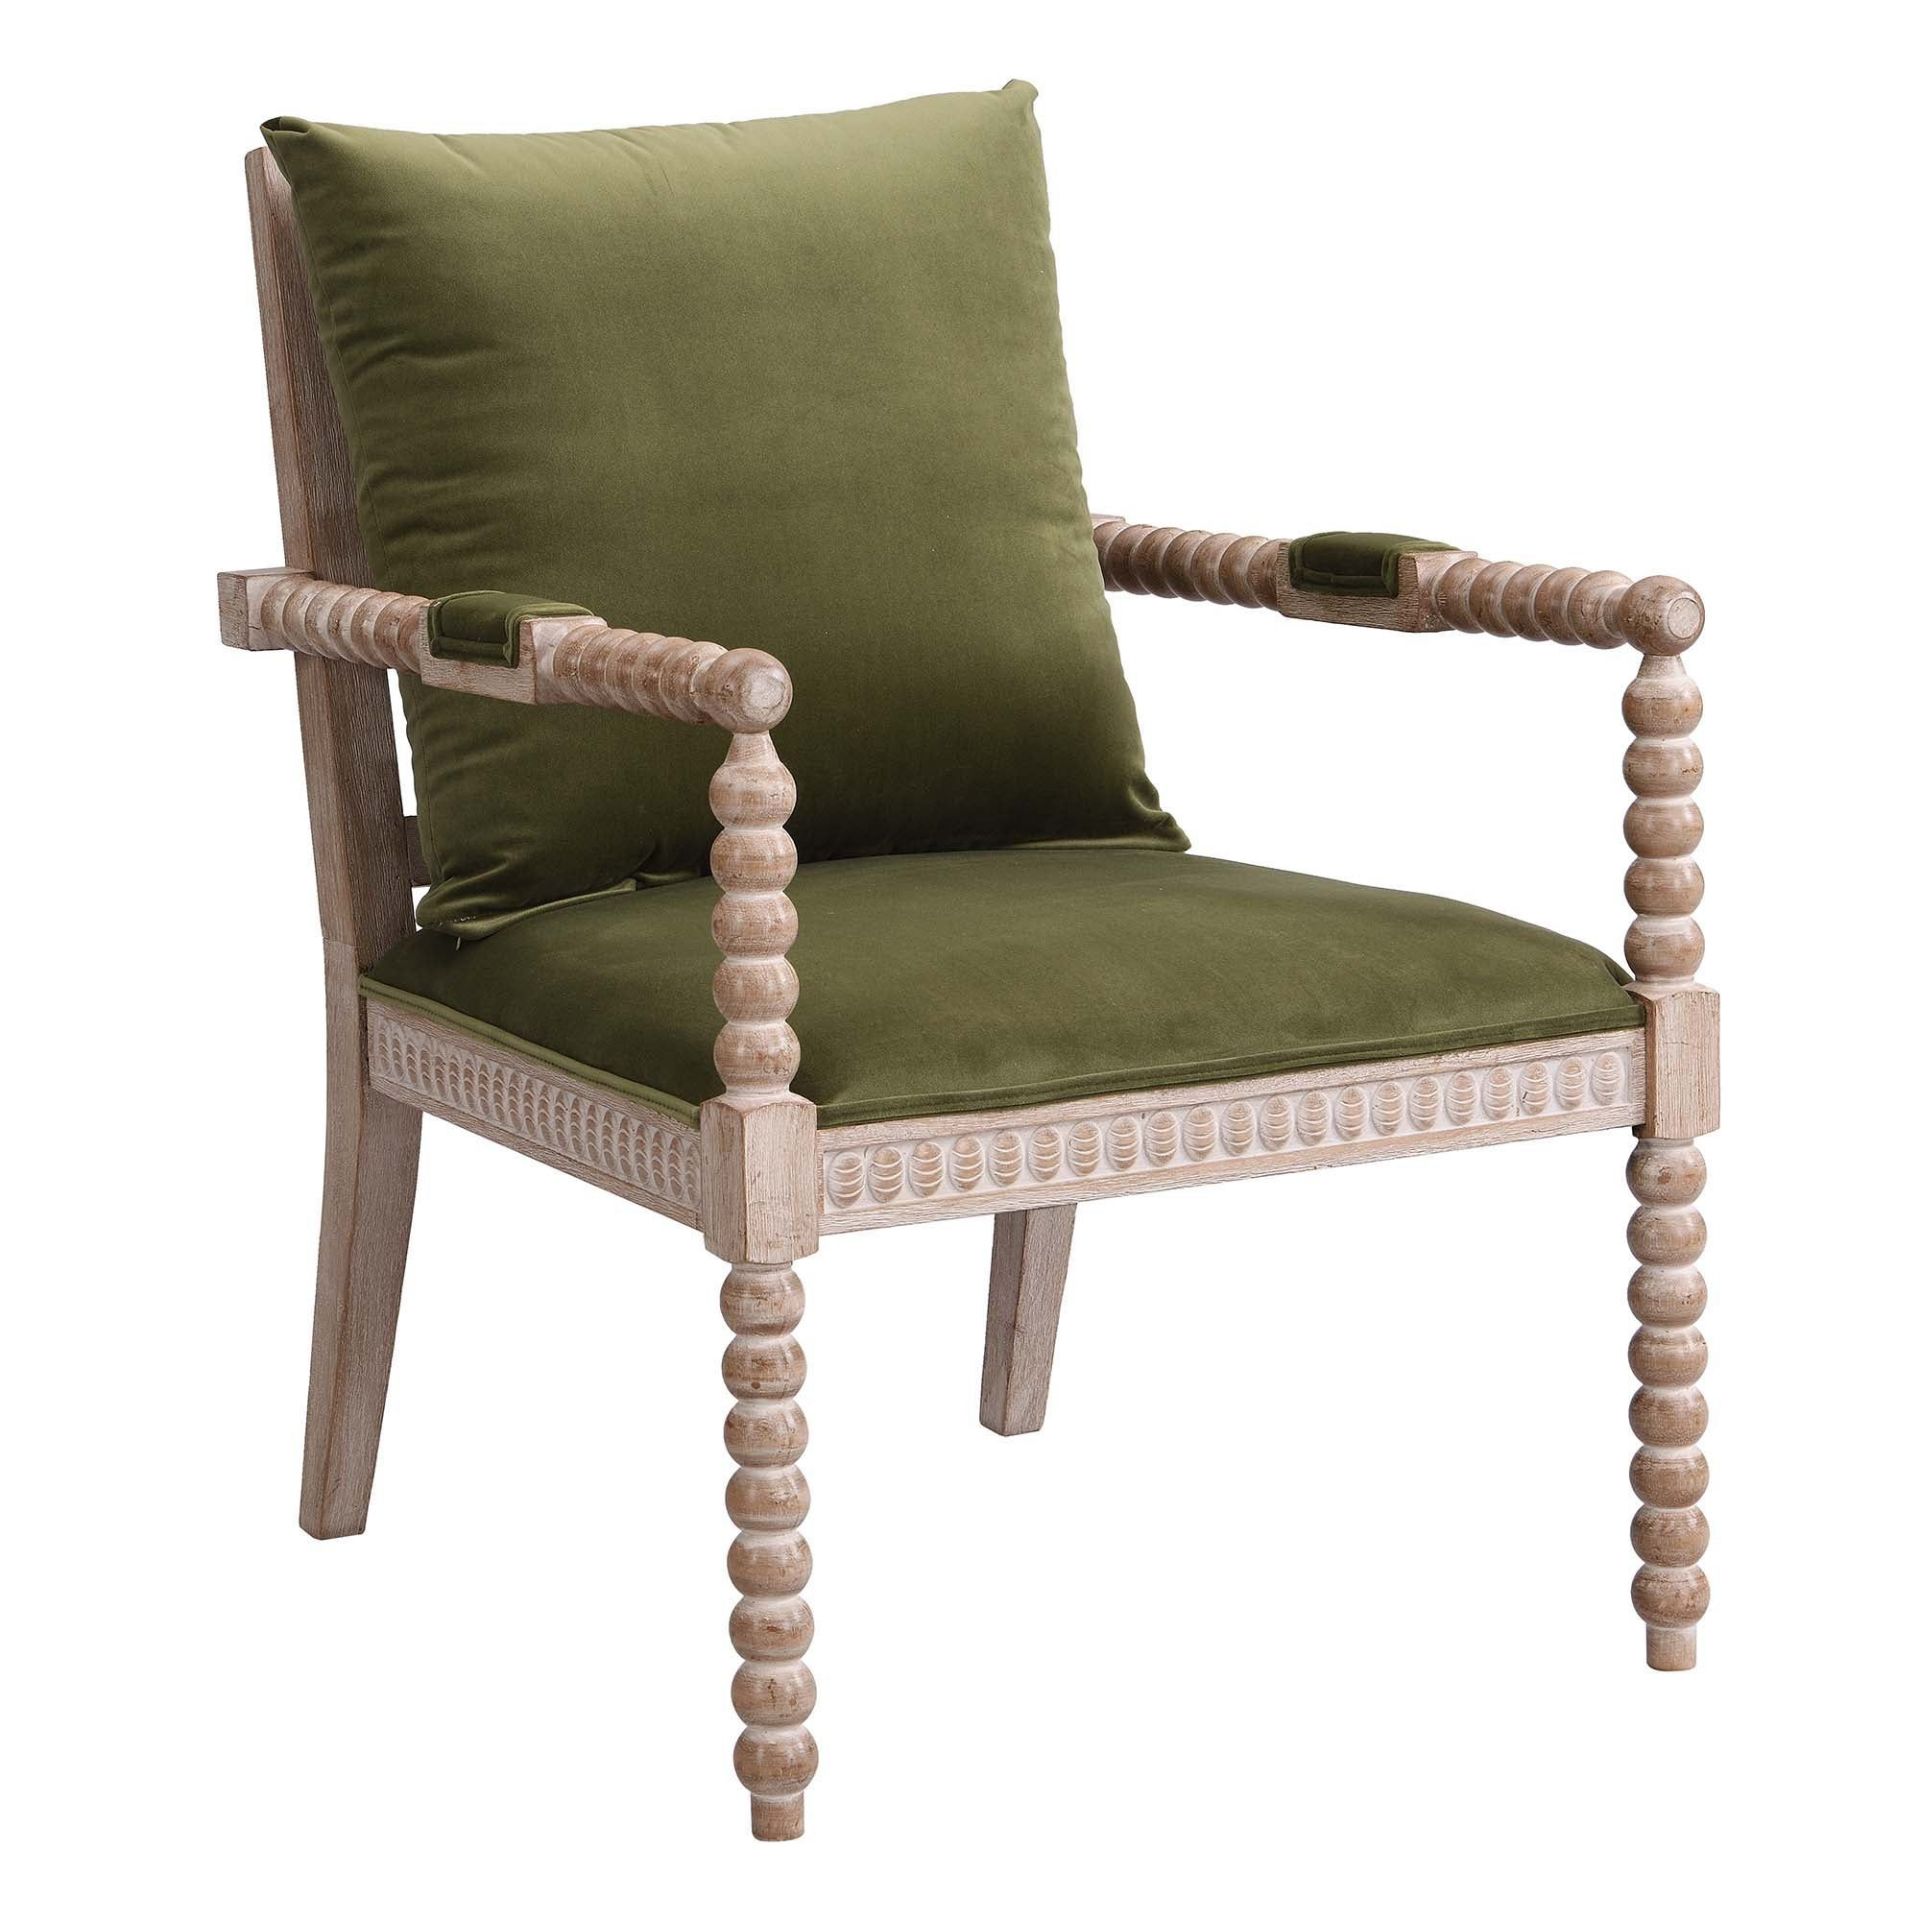 Hemingford Moss Green Velvet Bobbin Armchair. - R19.6. RRP £329.99. The chair has padded seat and - Image 2 of 2